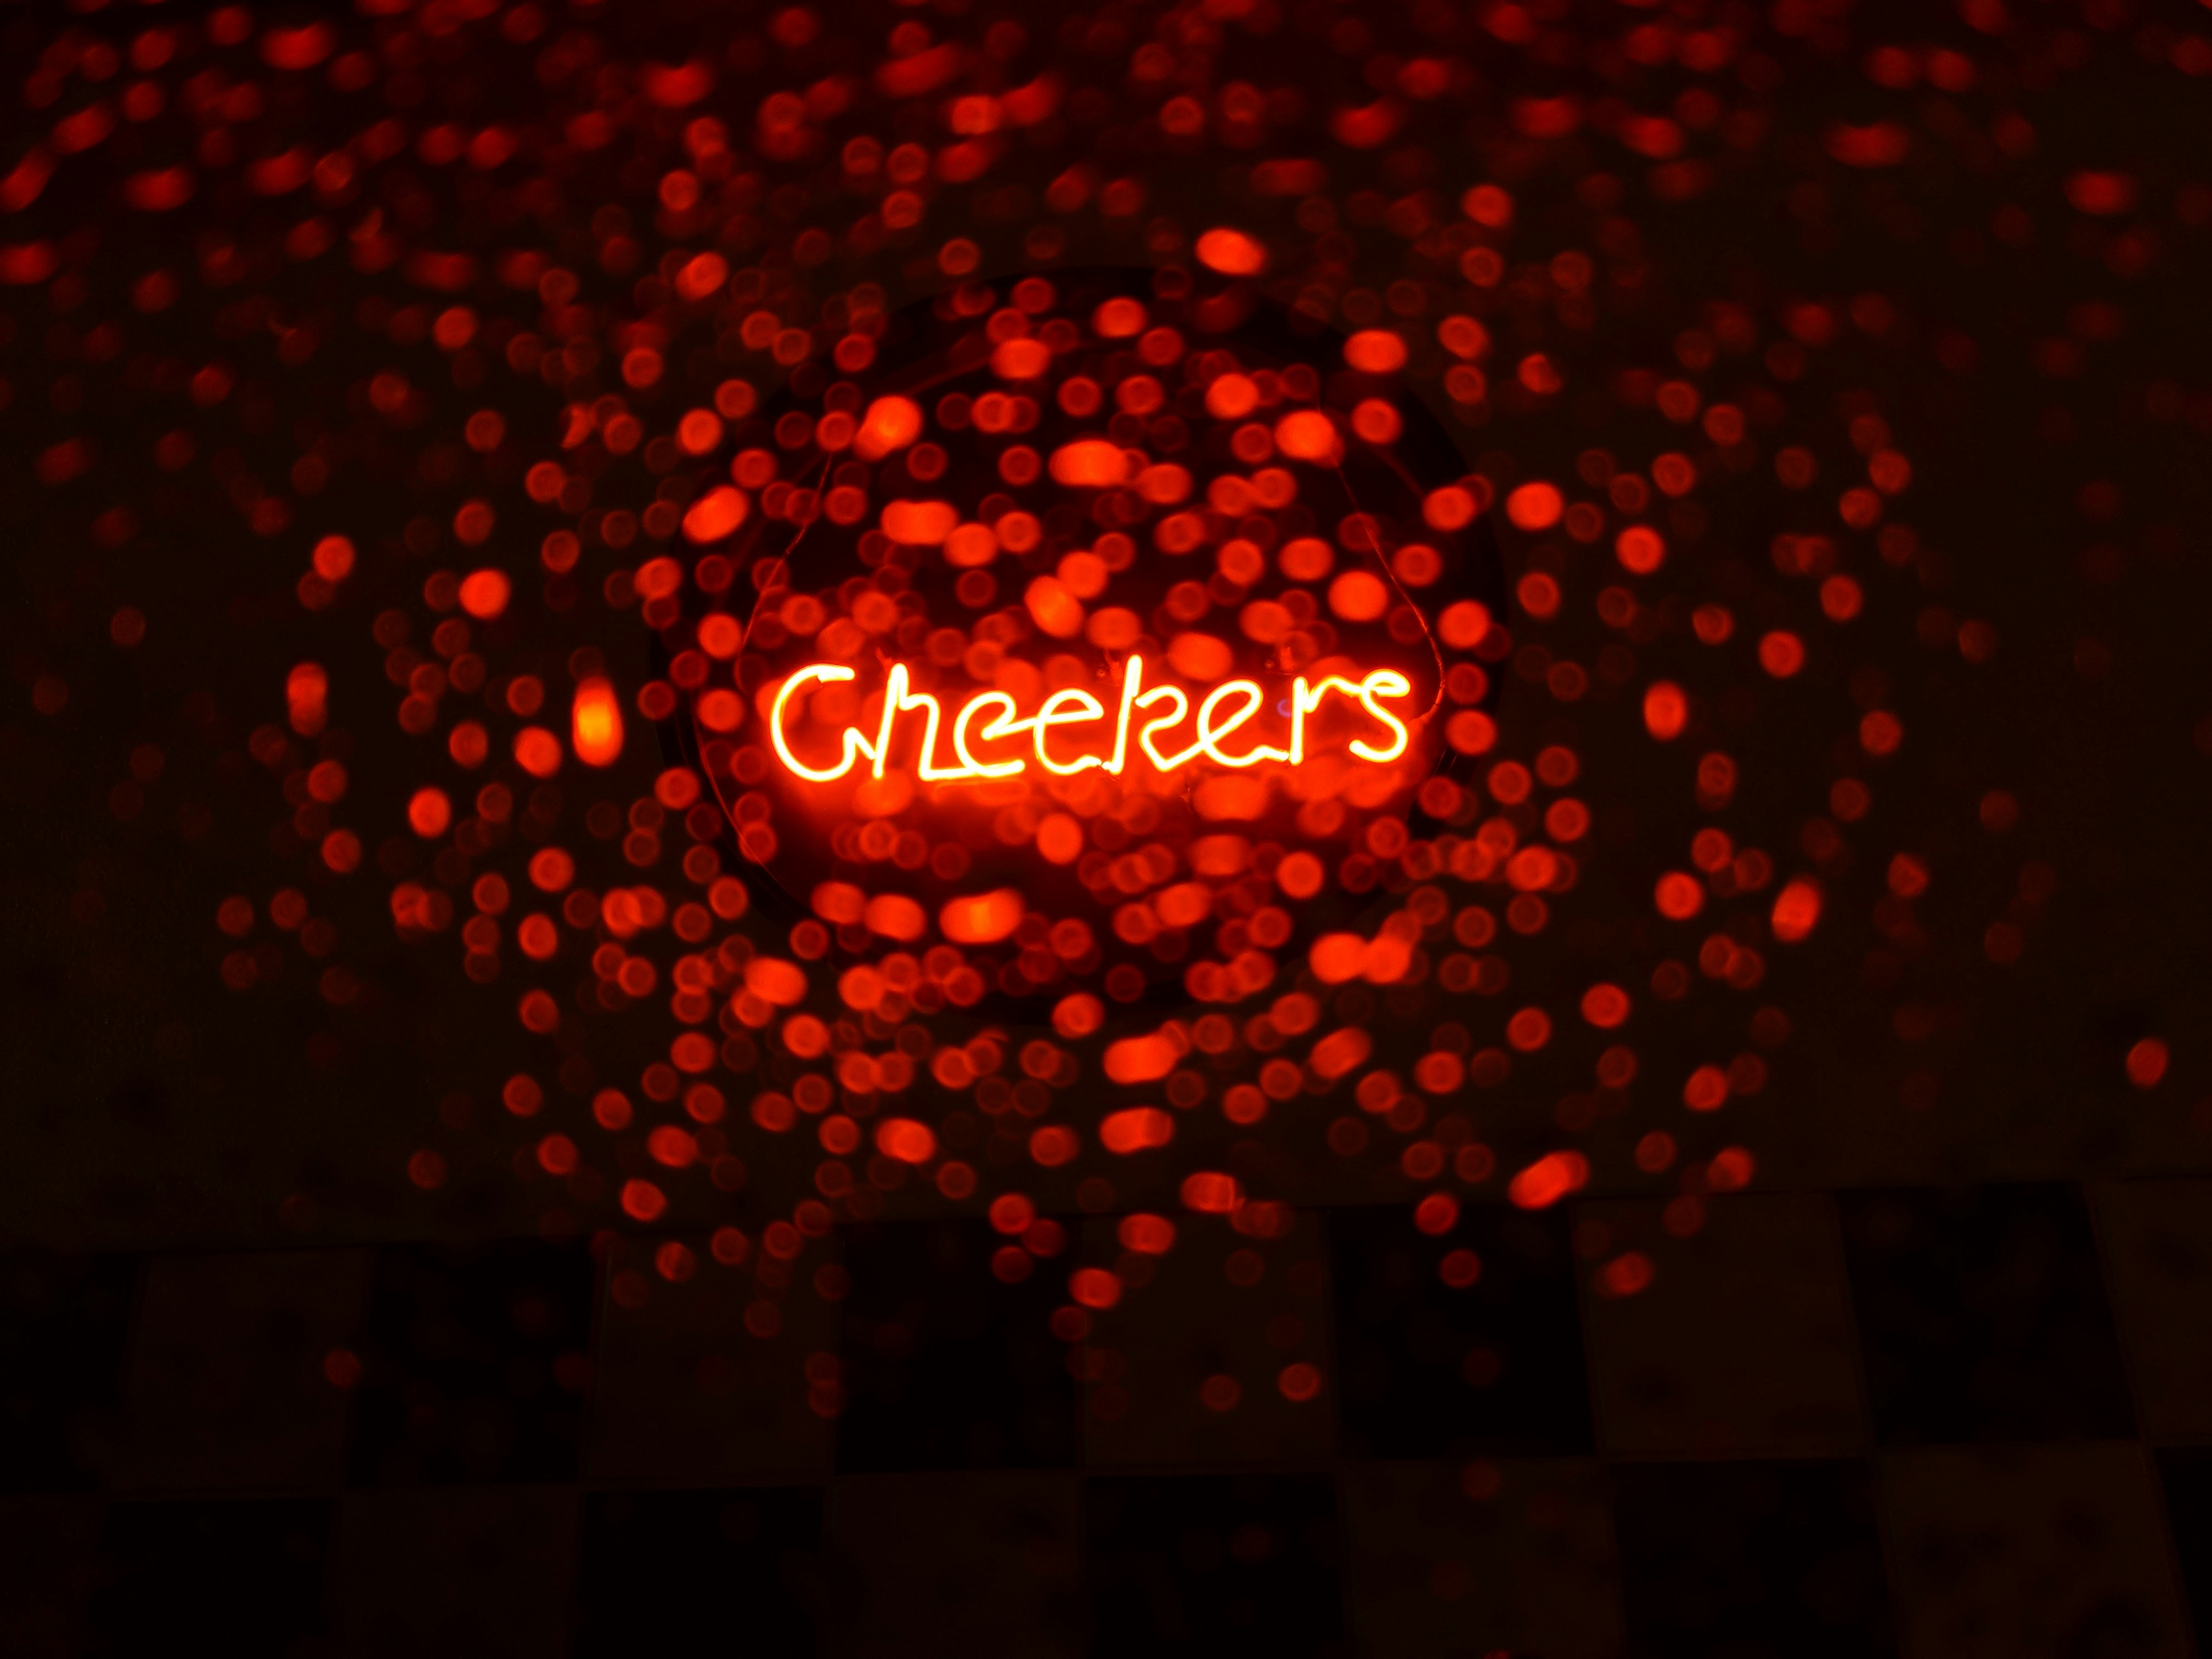 I was on my way home from work during a late rainy evening. As I passed through Fredericksburg I began to crave Checkers fries. I pulled into the drive through and saw this sign. Taking a picture through the glass attempting both focusing on the letters and the rain. I settled on focusing on the letters as it seemed to burn through everything else.